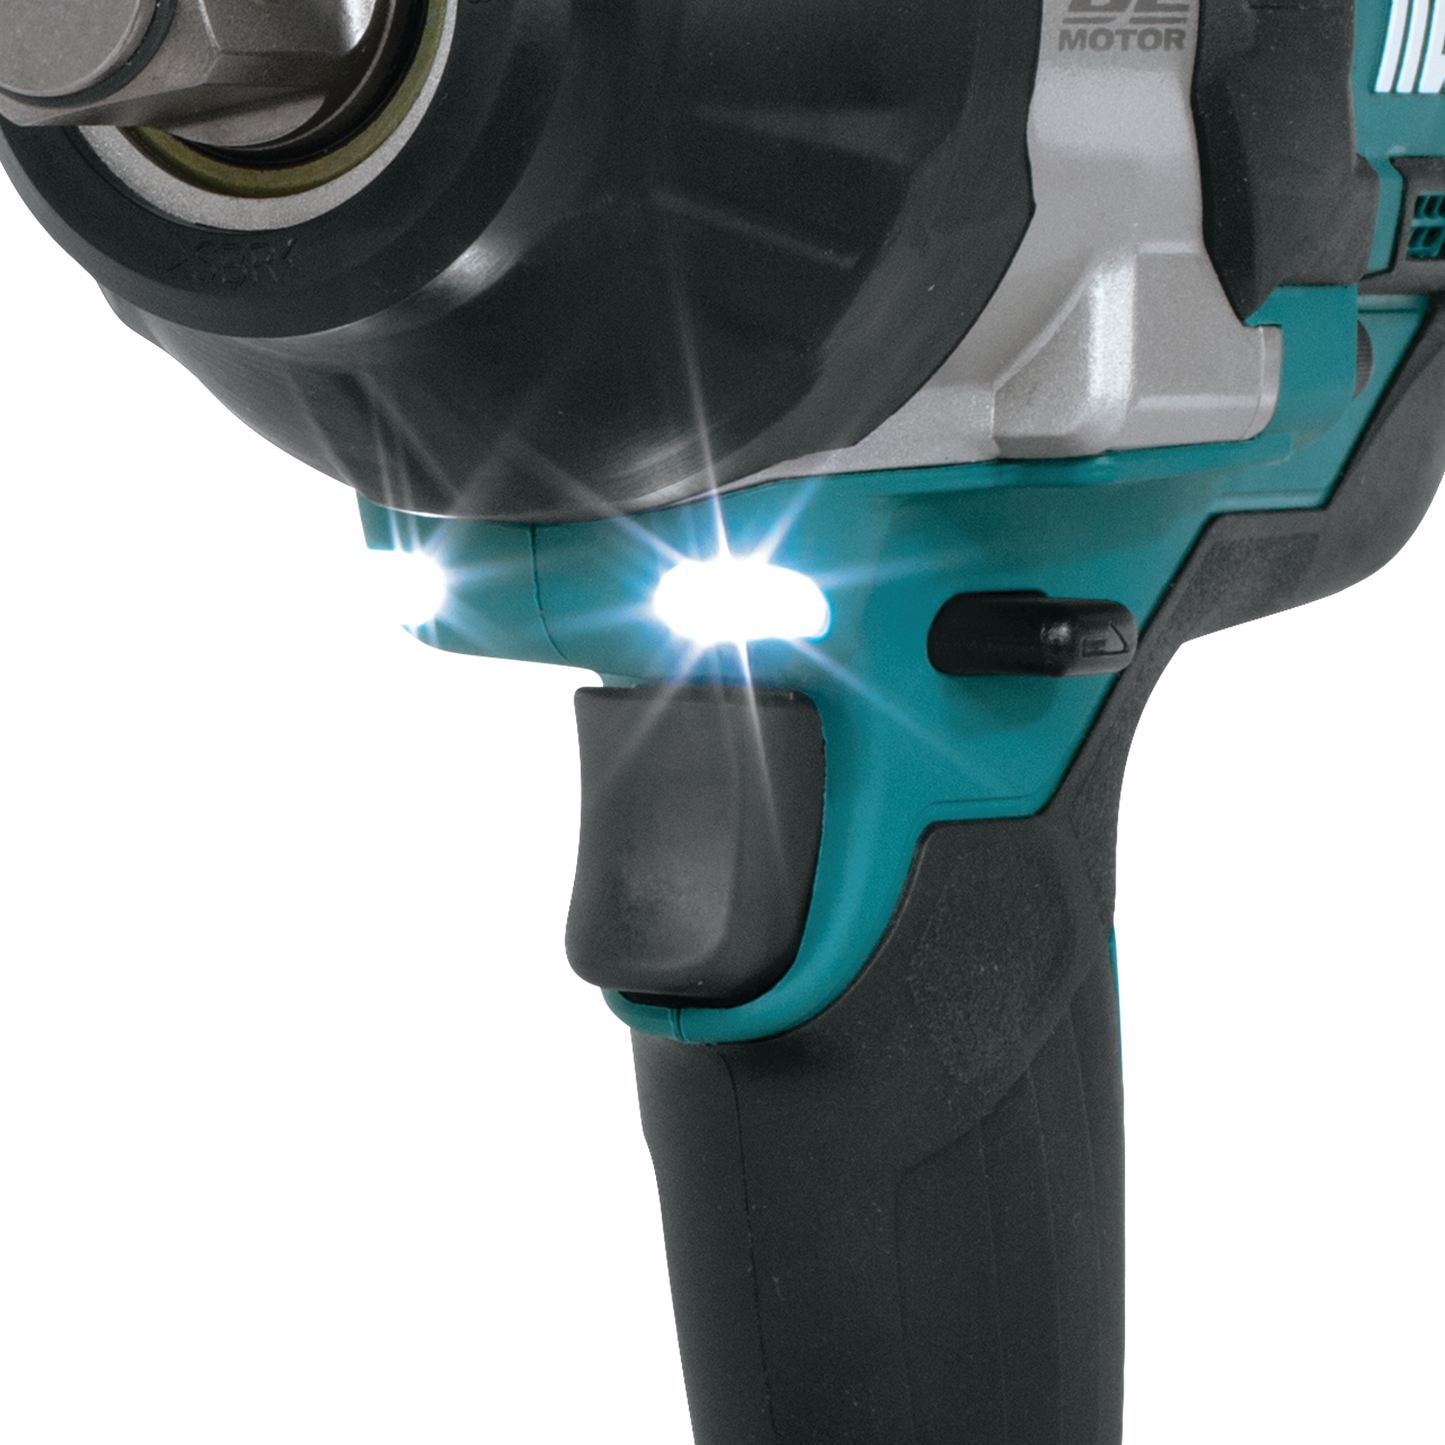 Makita 18V LXT Lithium Ion Brushless Cordless  High Torque 1/2 Inch Sq Drive Impact Wrench Factory Serviced Tool Only